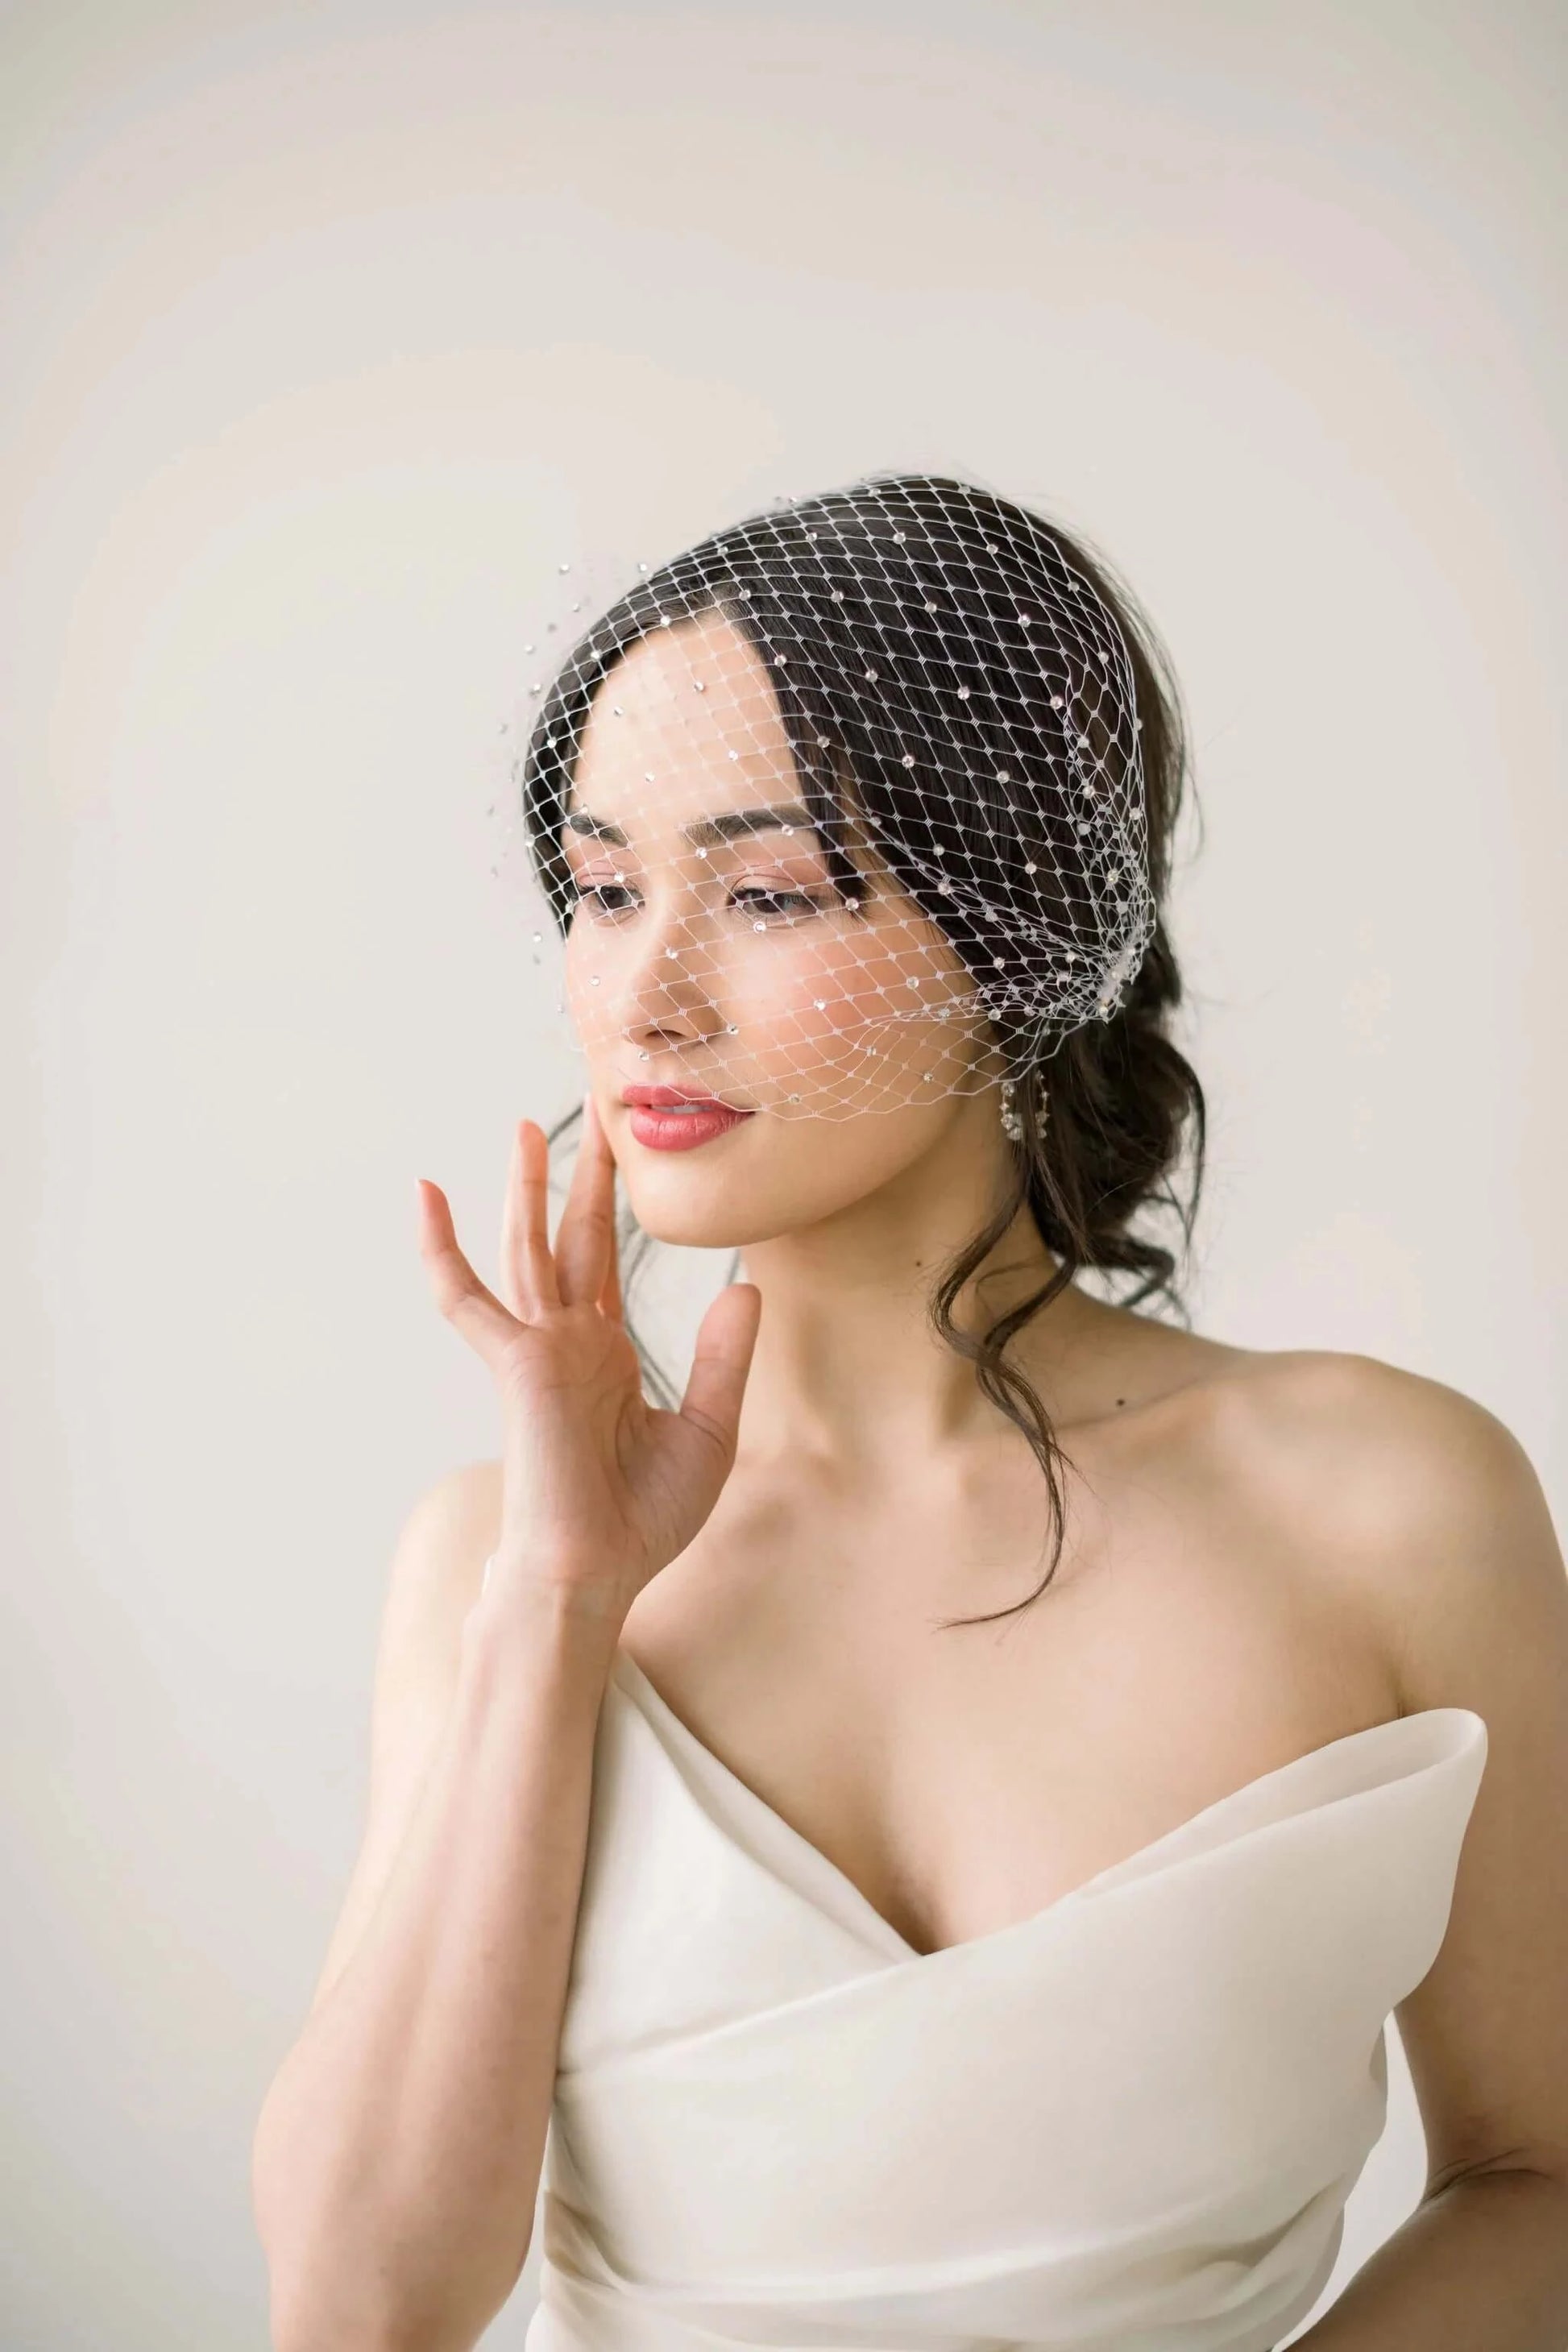 Mini birdcage veil with crystals - ready to ship